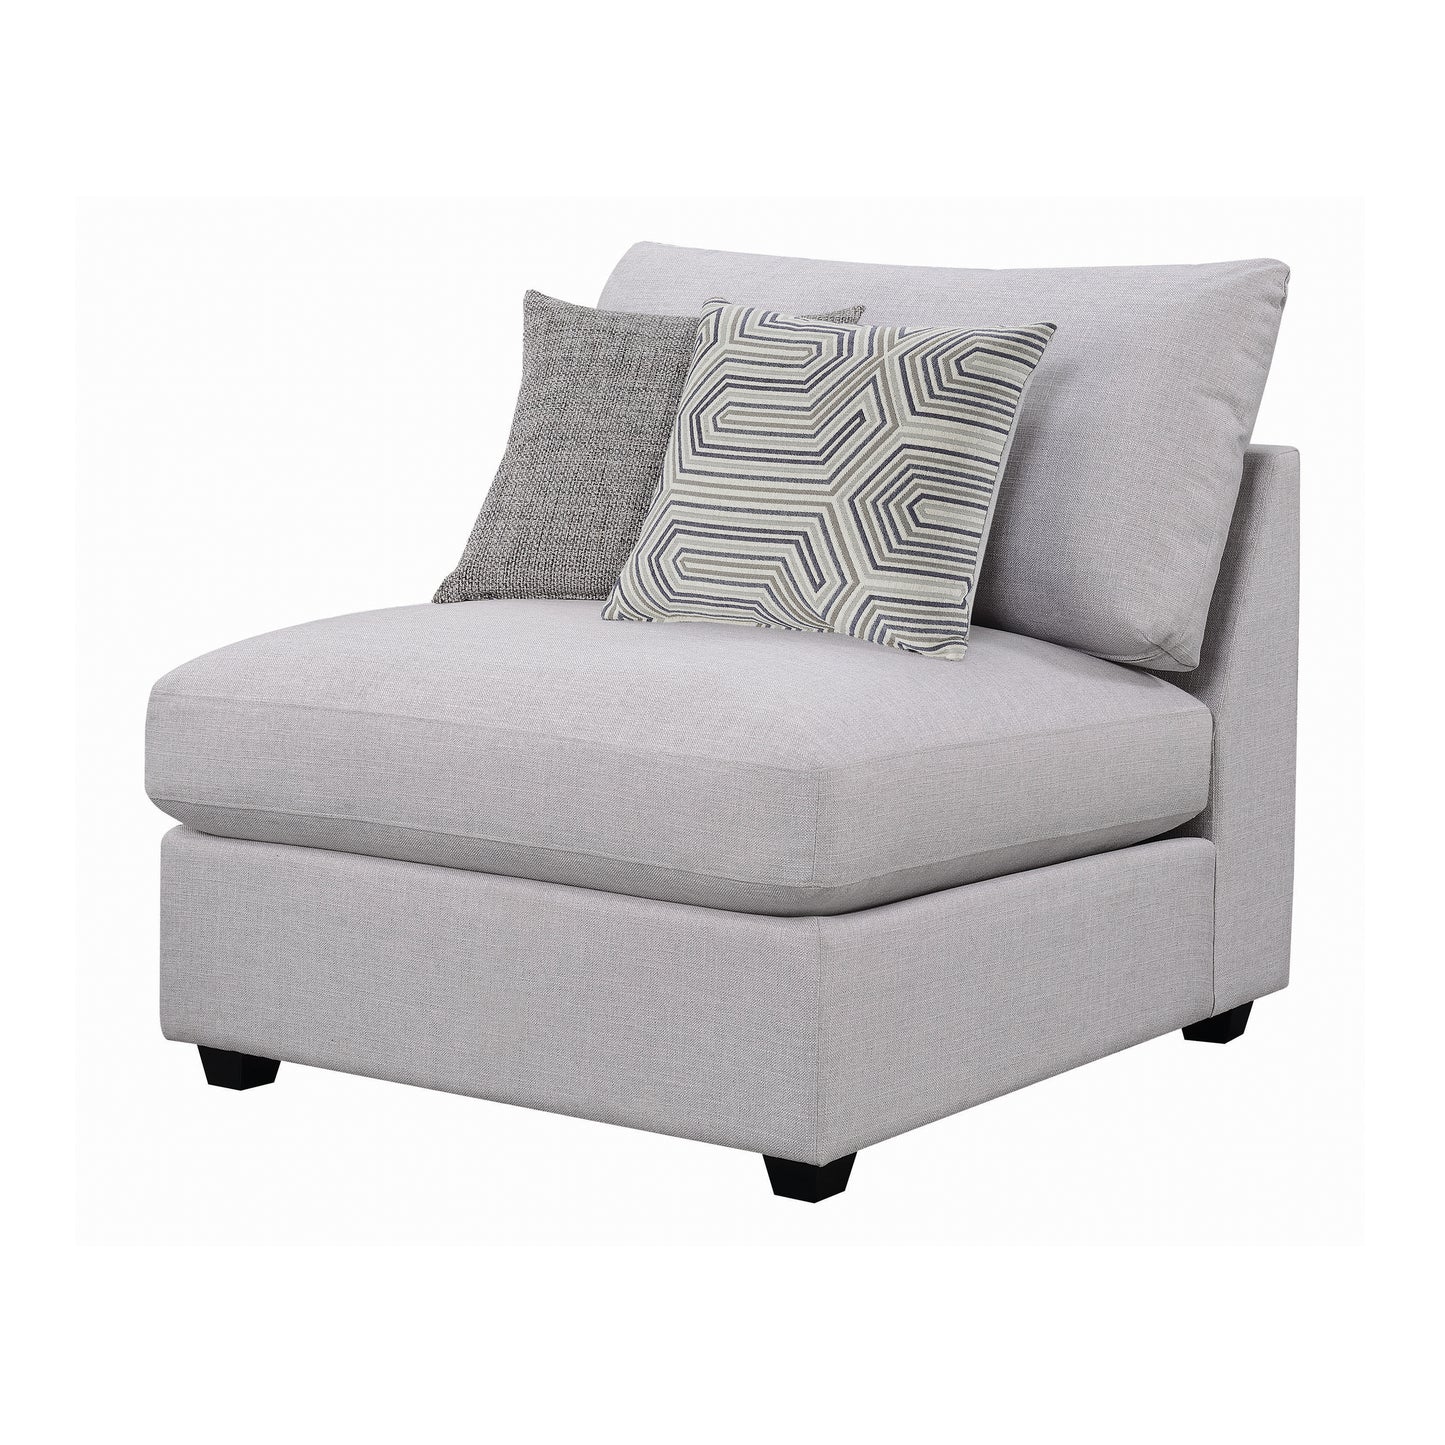 Cambria Upholstered Armless Chair Grey -  551511